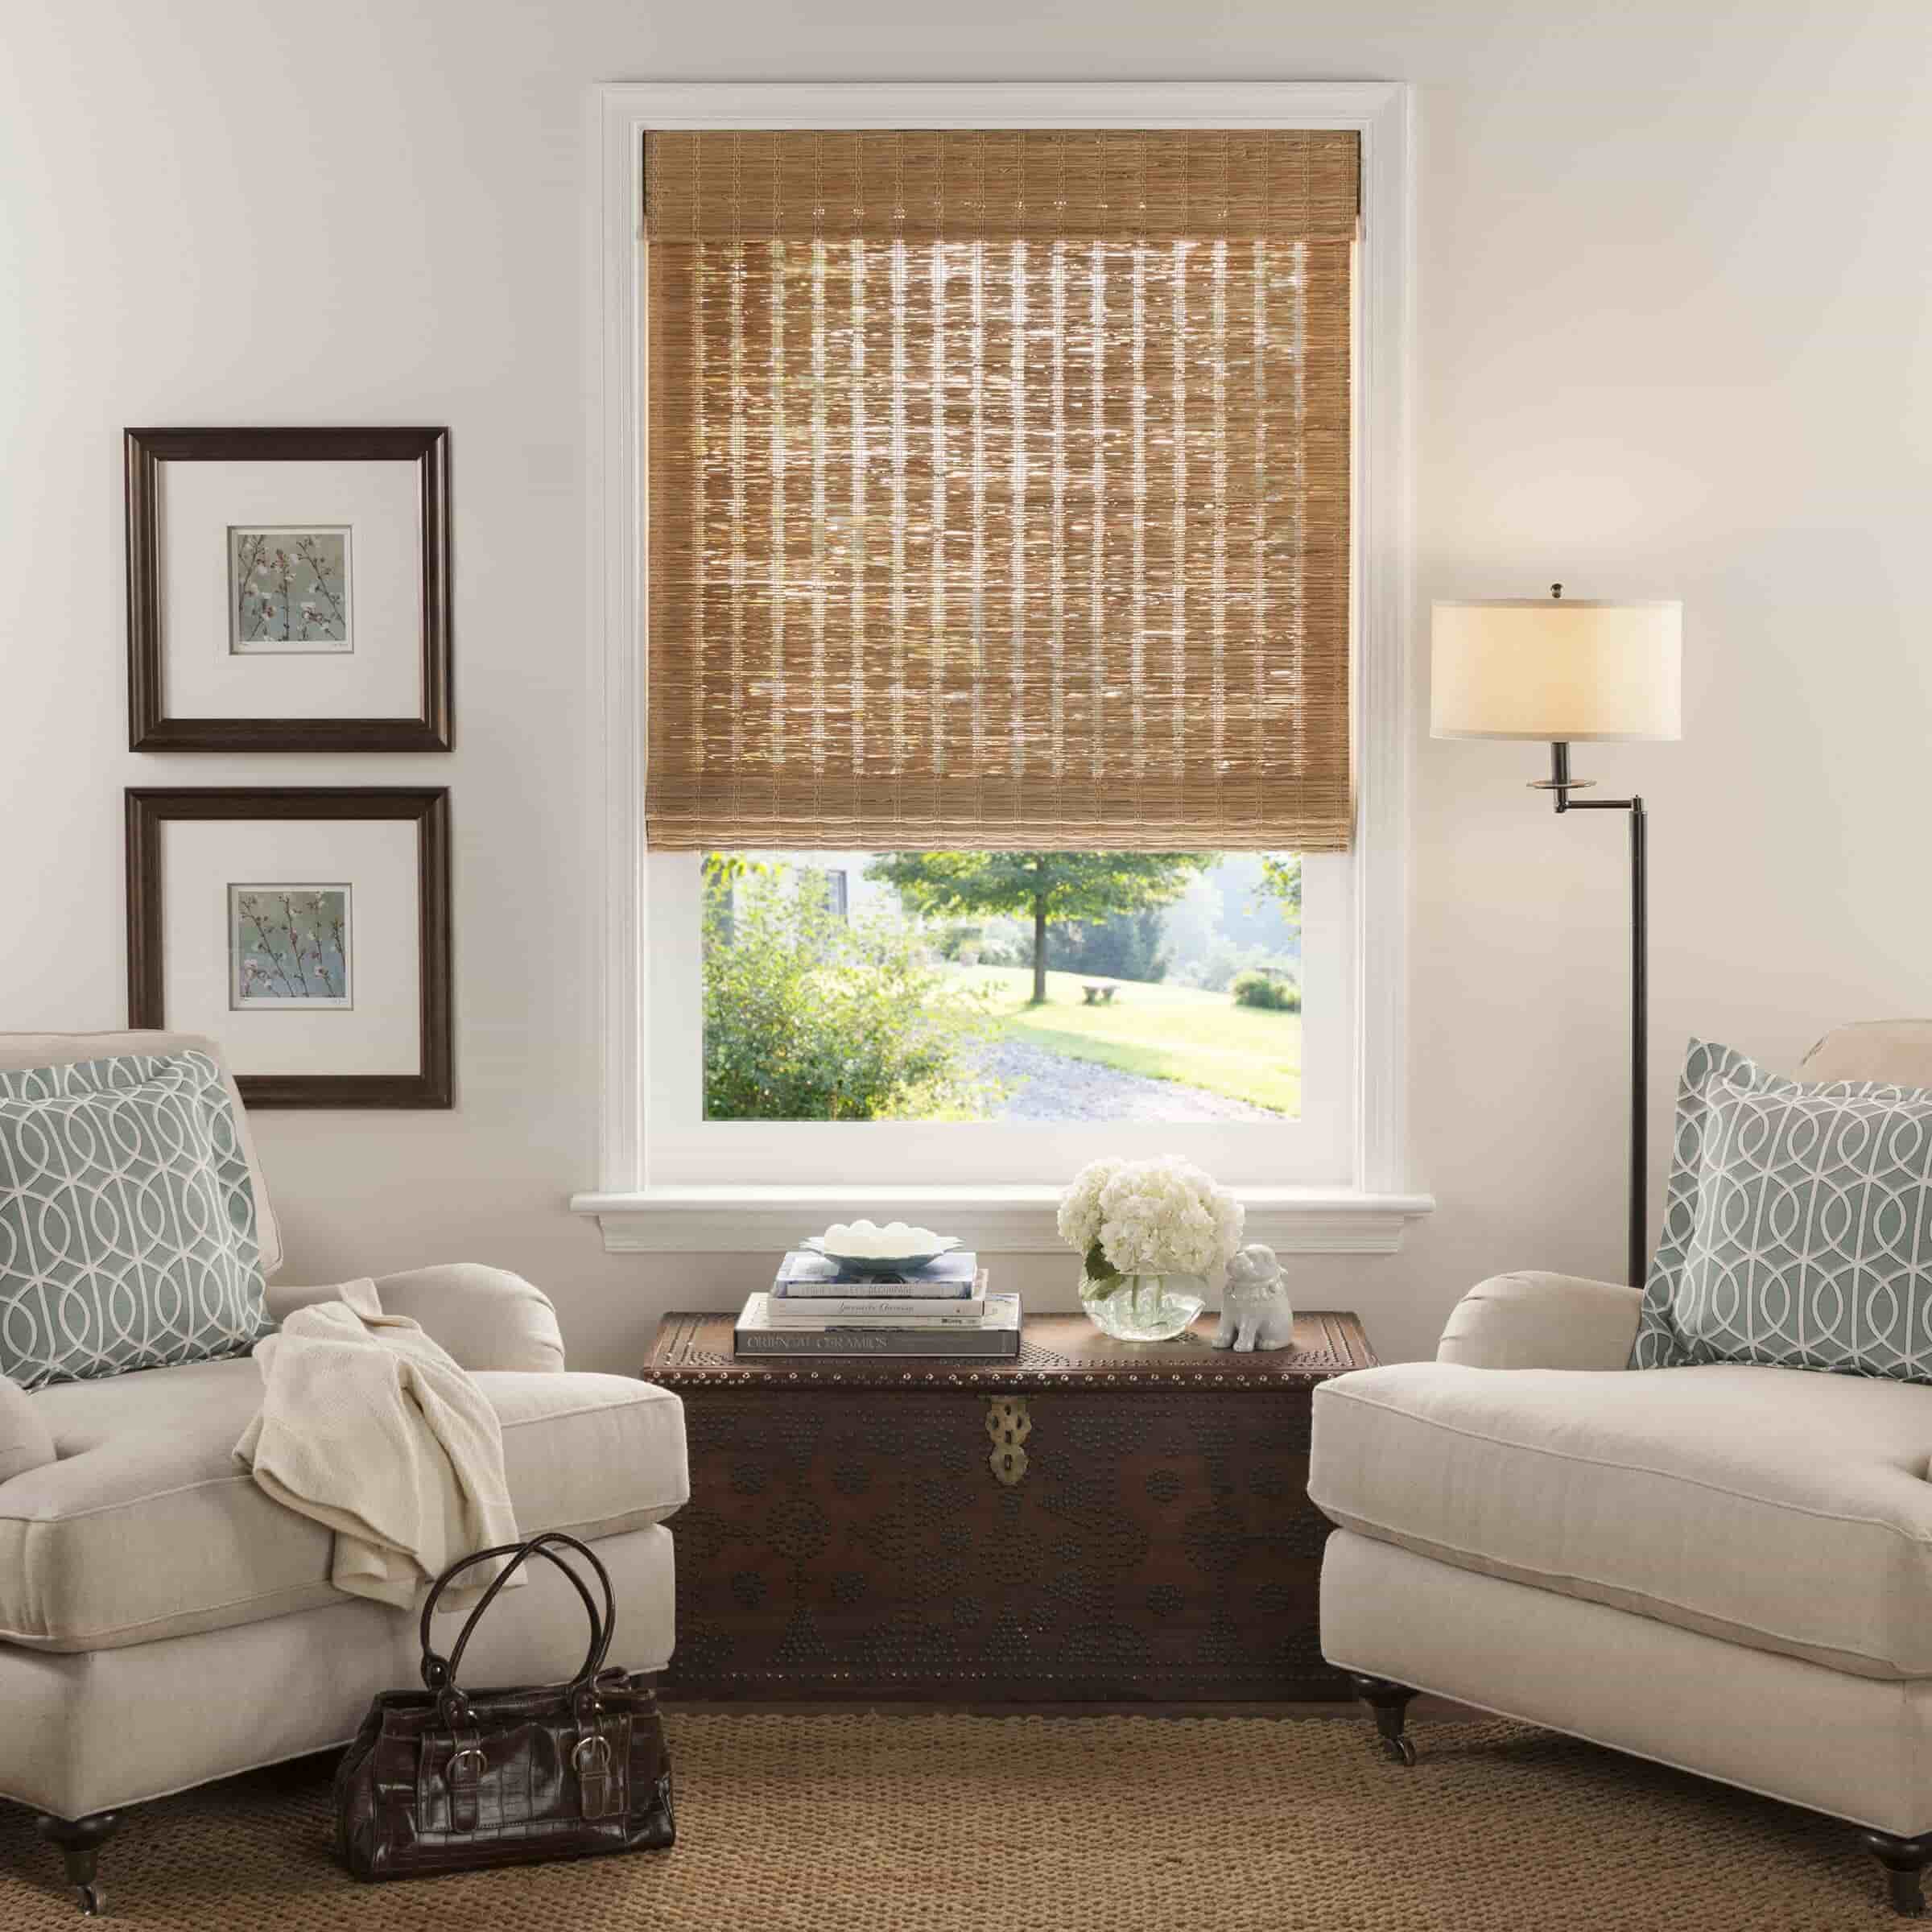 Window Blinds & Shades